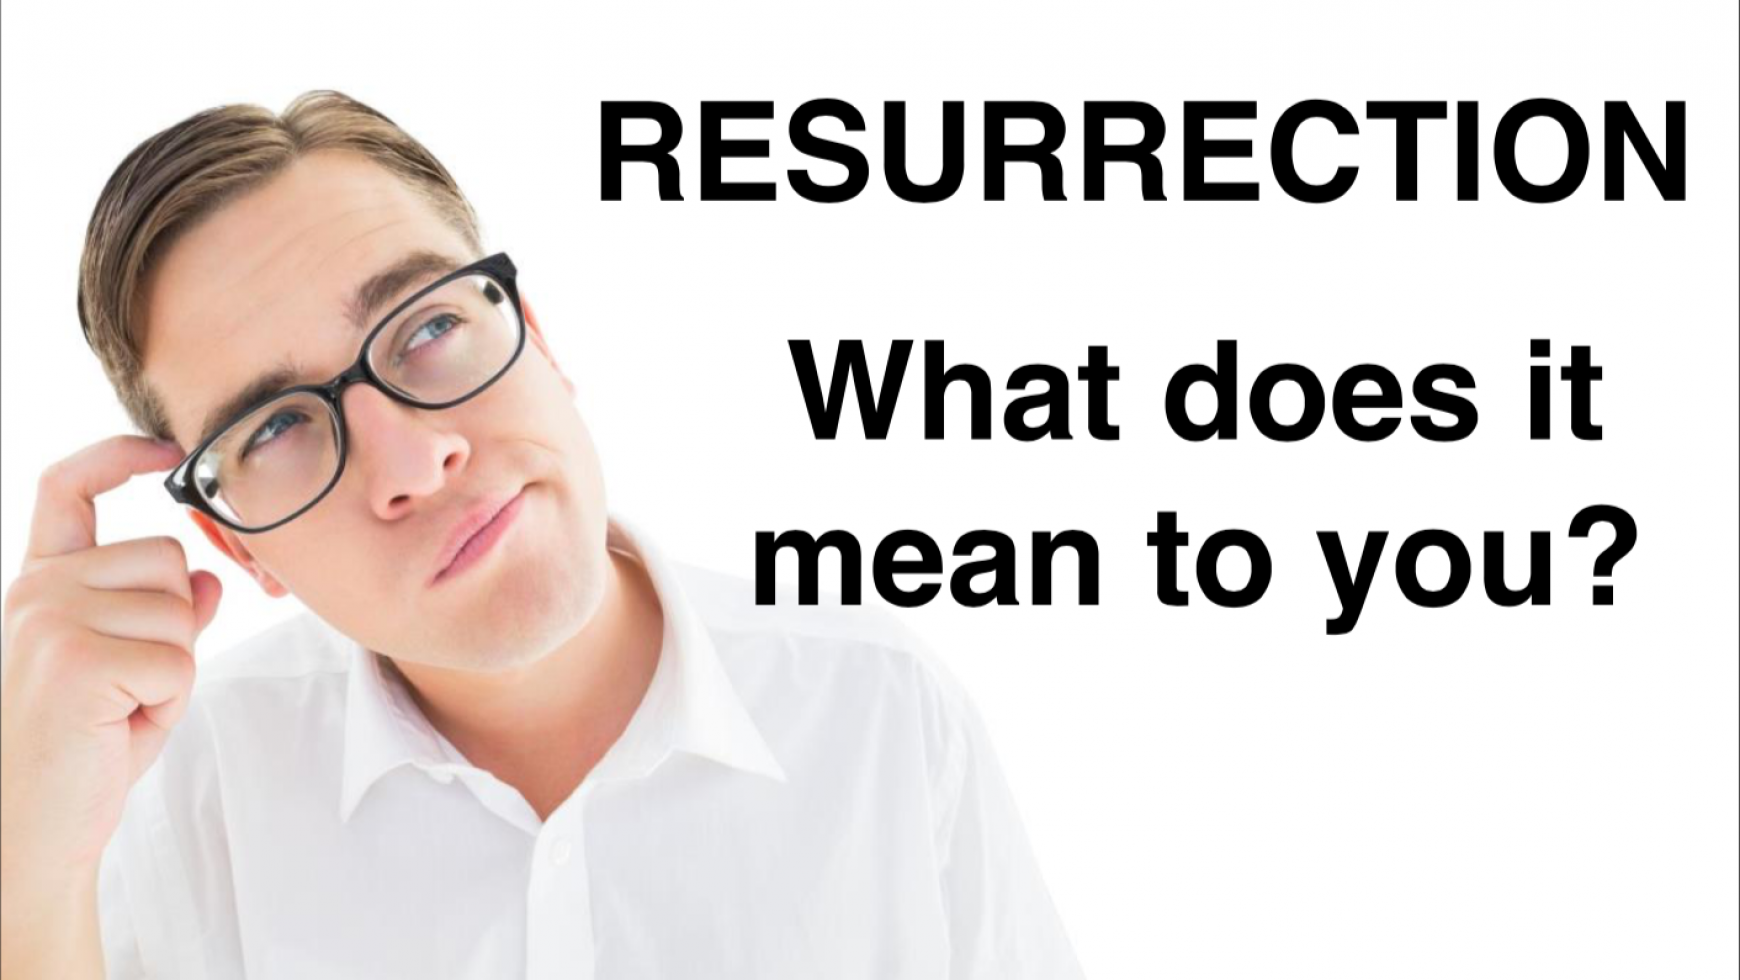 Resurrection – What does it mean to you?